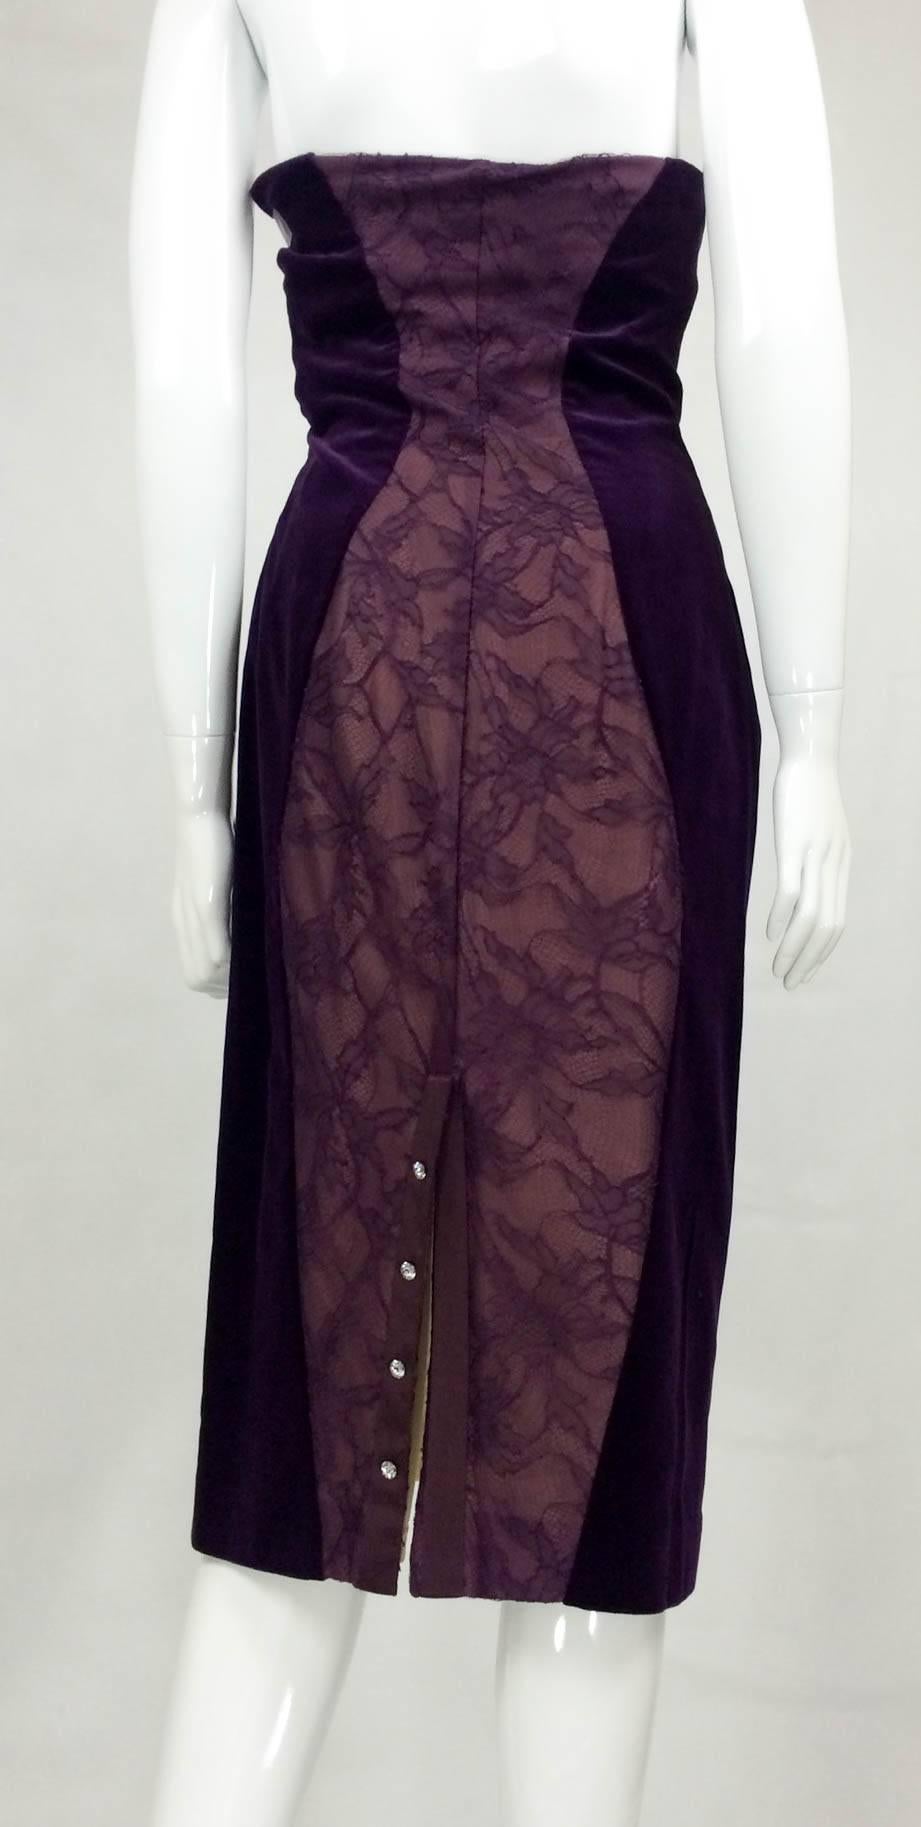 Paco Rabanne Velvet and Lace Dress - 1970s In Excellent Condition For Sale In London, Chelsea